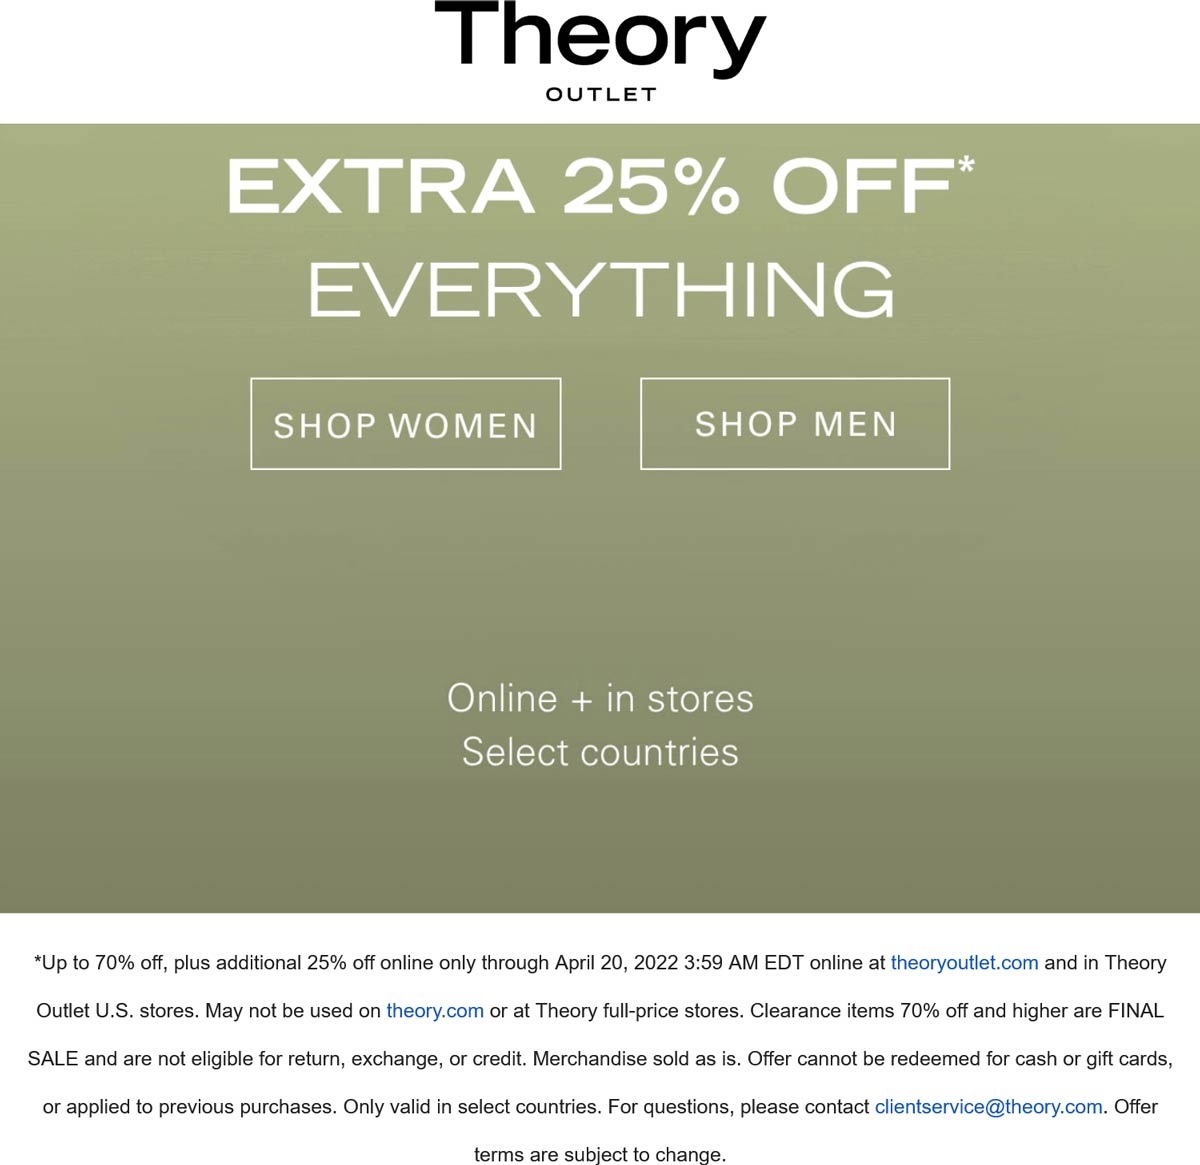 Theory Outlet stores Coupon  Extra 25% off everything today at Theory Outlet, ditto online #theoryoutlet 